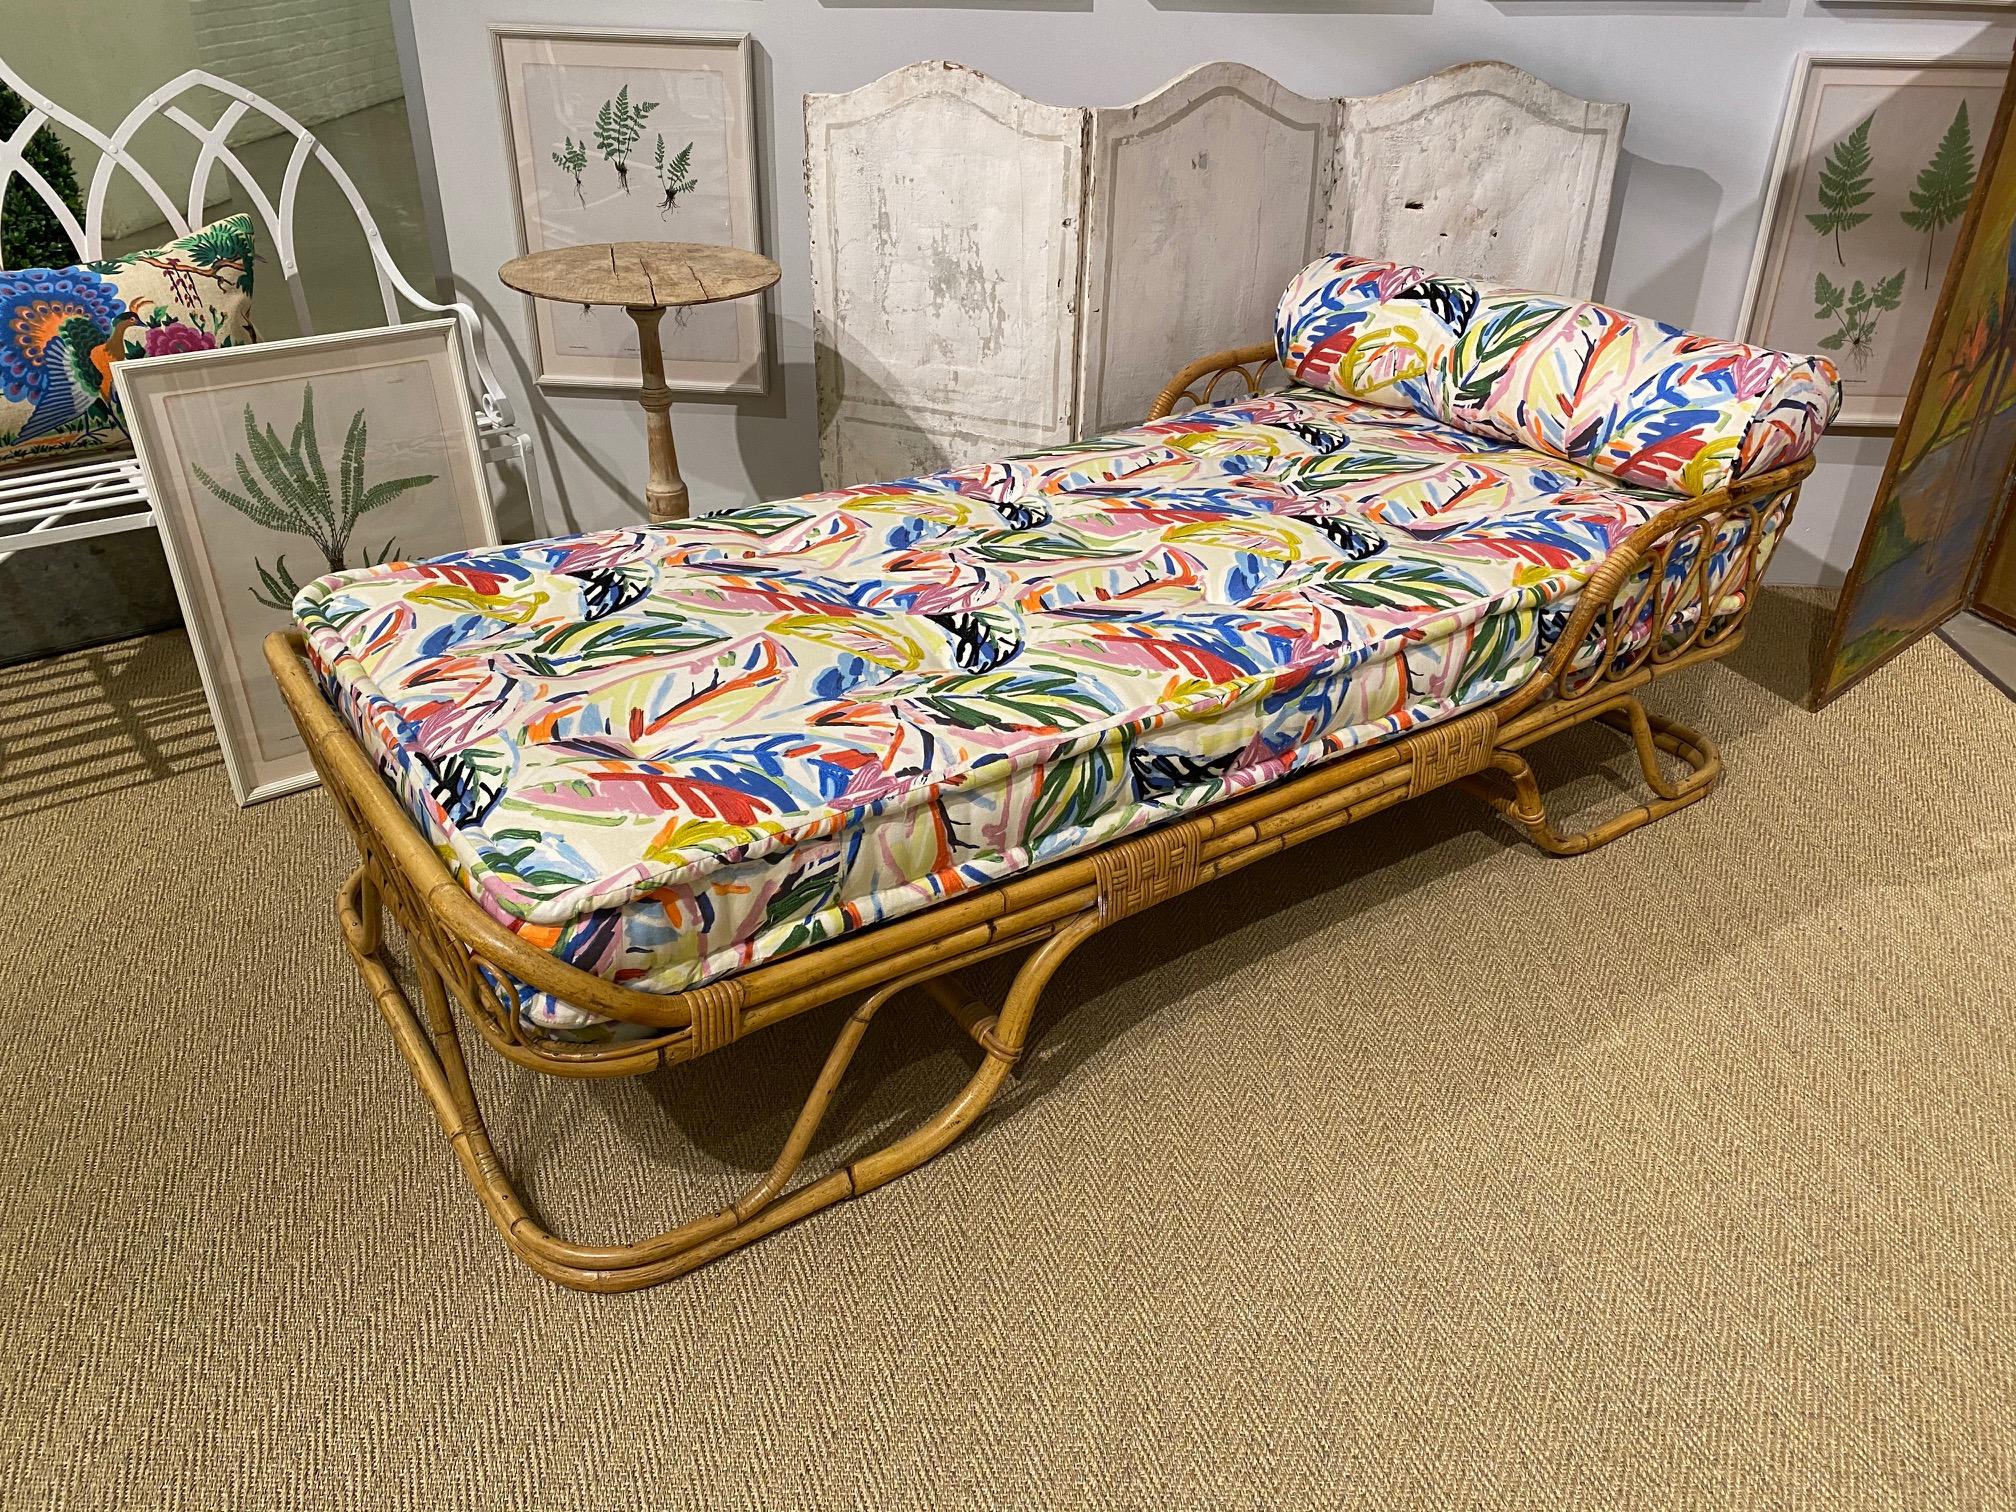 Vintage Italian bamboo daybed with custom mattress and bolster pillow in George Spencer designs 